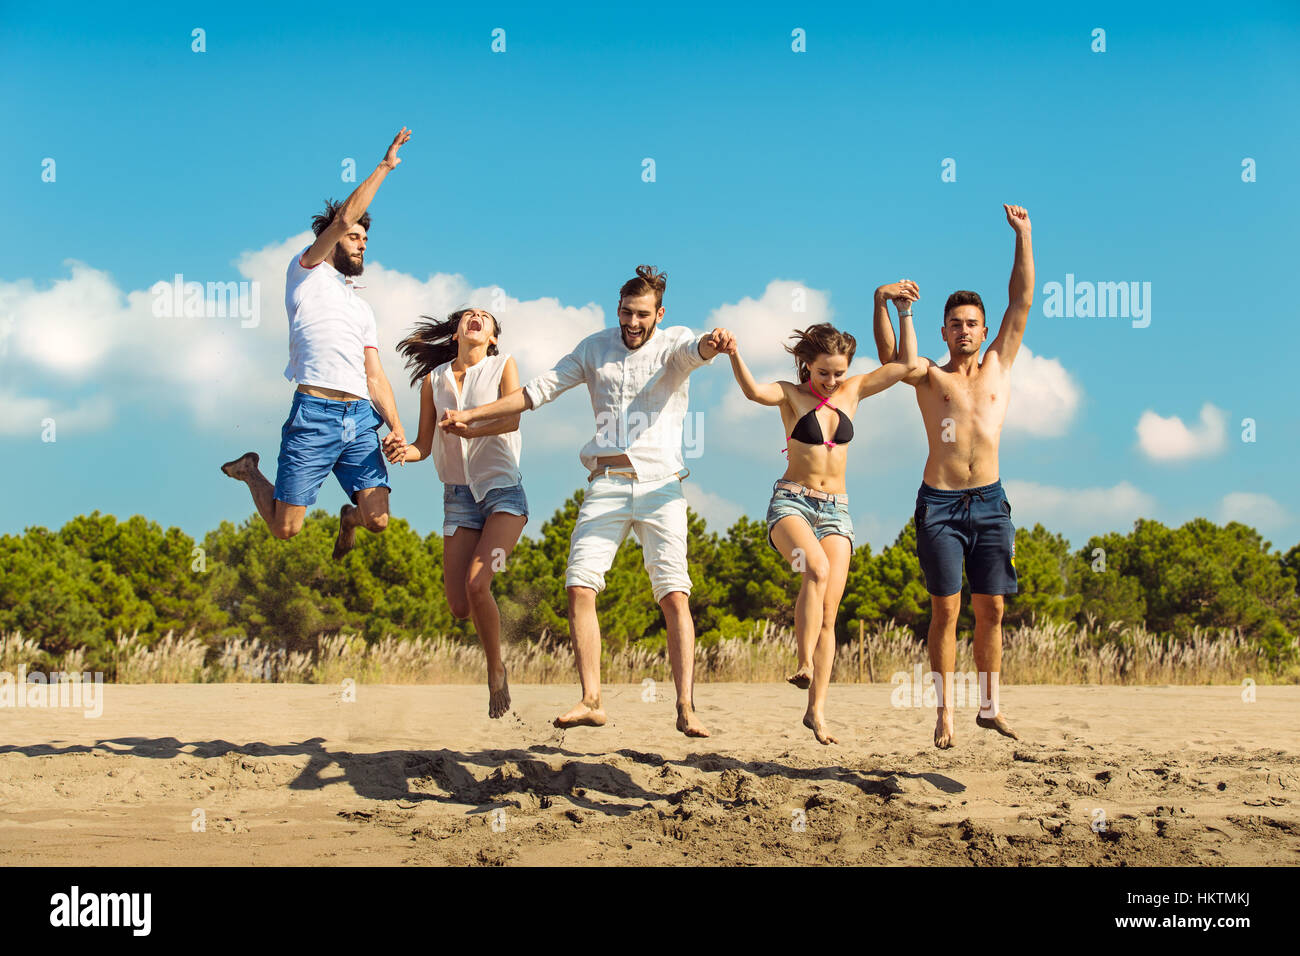 Group of friends together on the beach having fun Stock Photo - Alamy